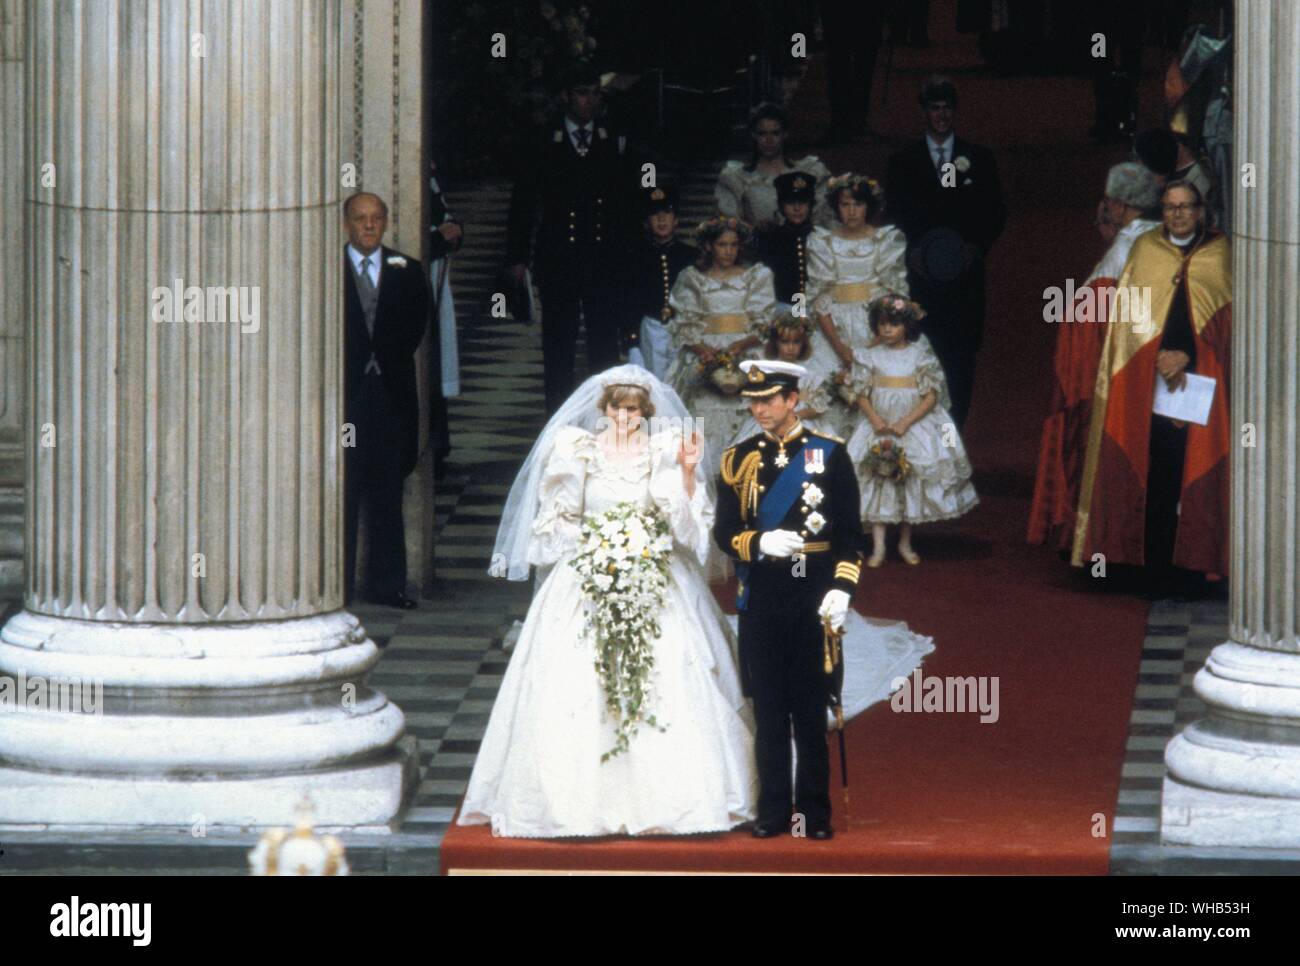 Wedding of the Prince and Princess of Wales (Lady Diana Spencer) 29 July 1981 - on the steps of St. Pauls - The bridesmaids and pages are Lady Sarah Armstrong Jones 17, Edward Van Cutsem 8, Lord Nicholas Windsor 7, India Hicks 13, Sarah Jane Gaselee 11, Catherine Cameron 6 and Clementine Hambro 5.. Stock Photo